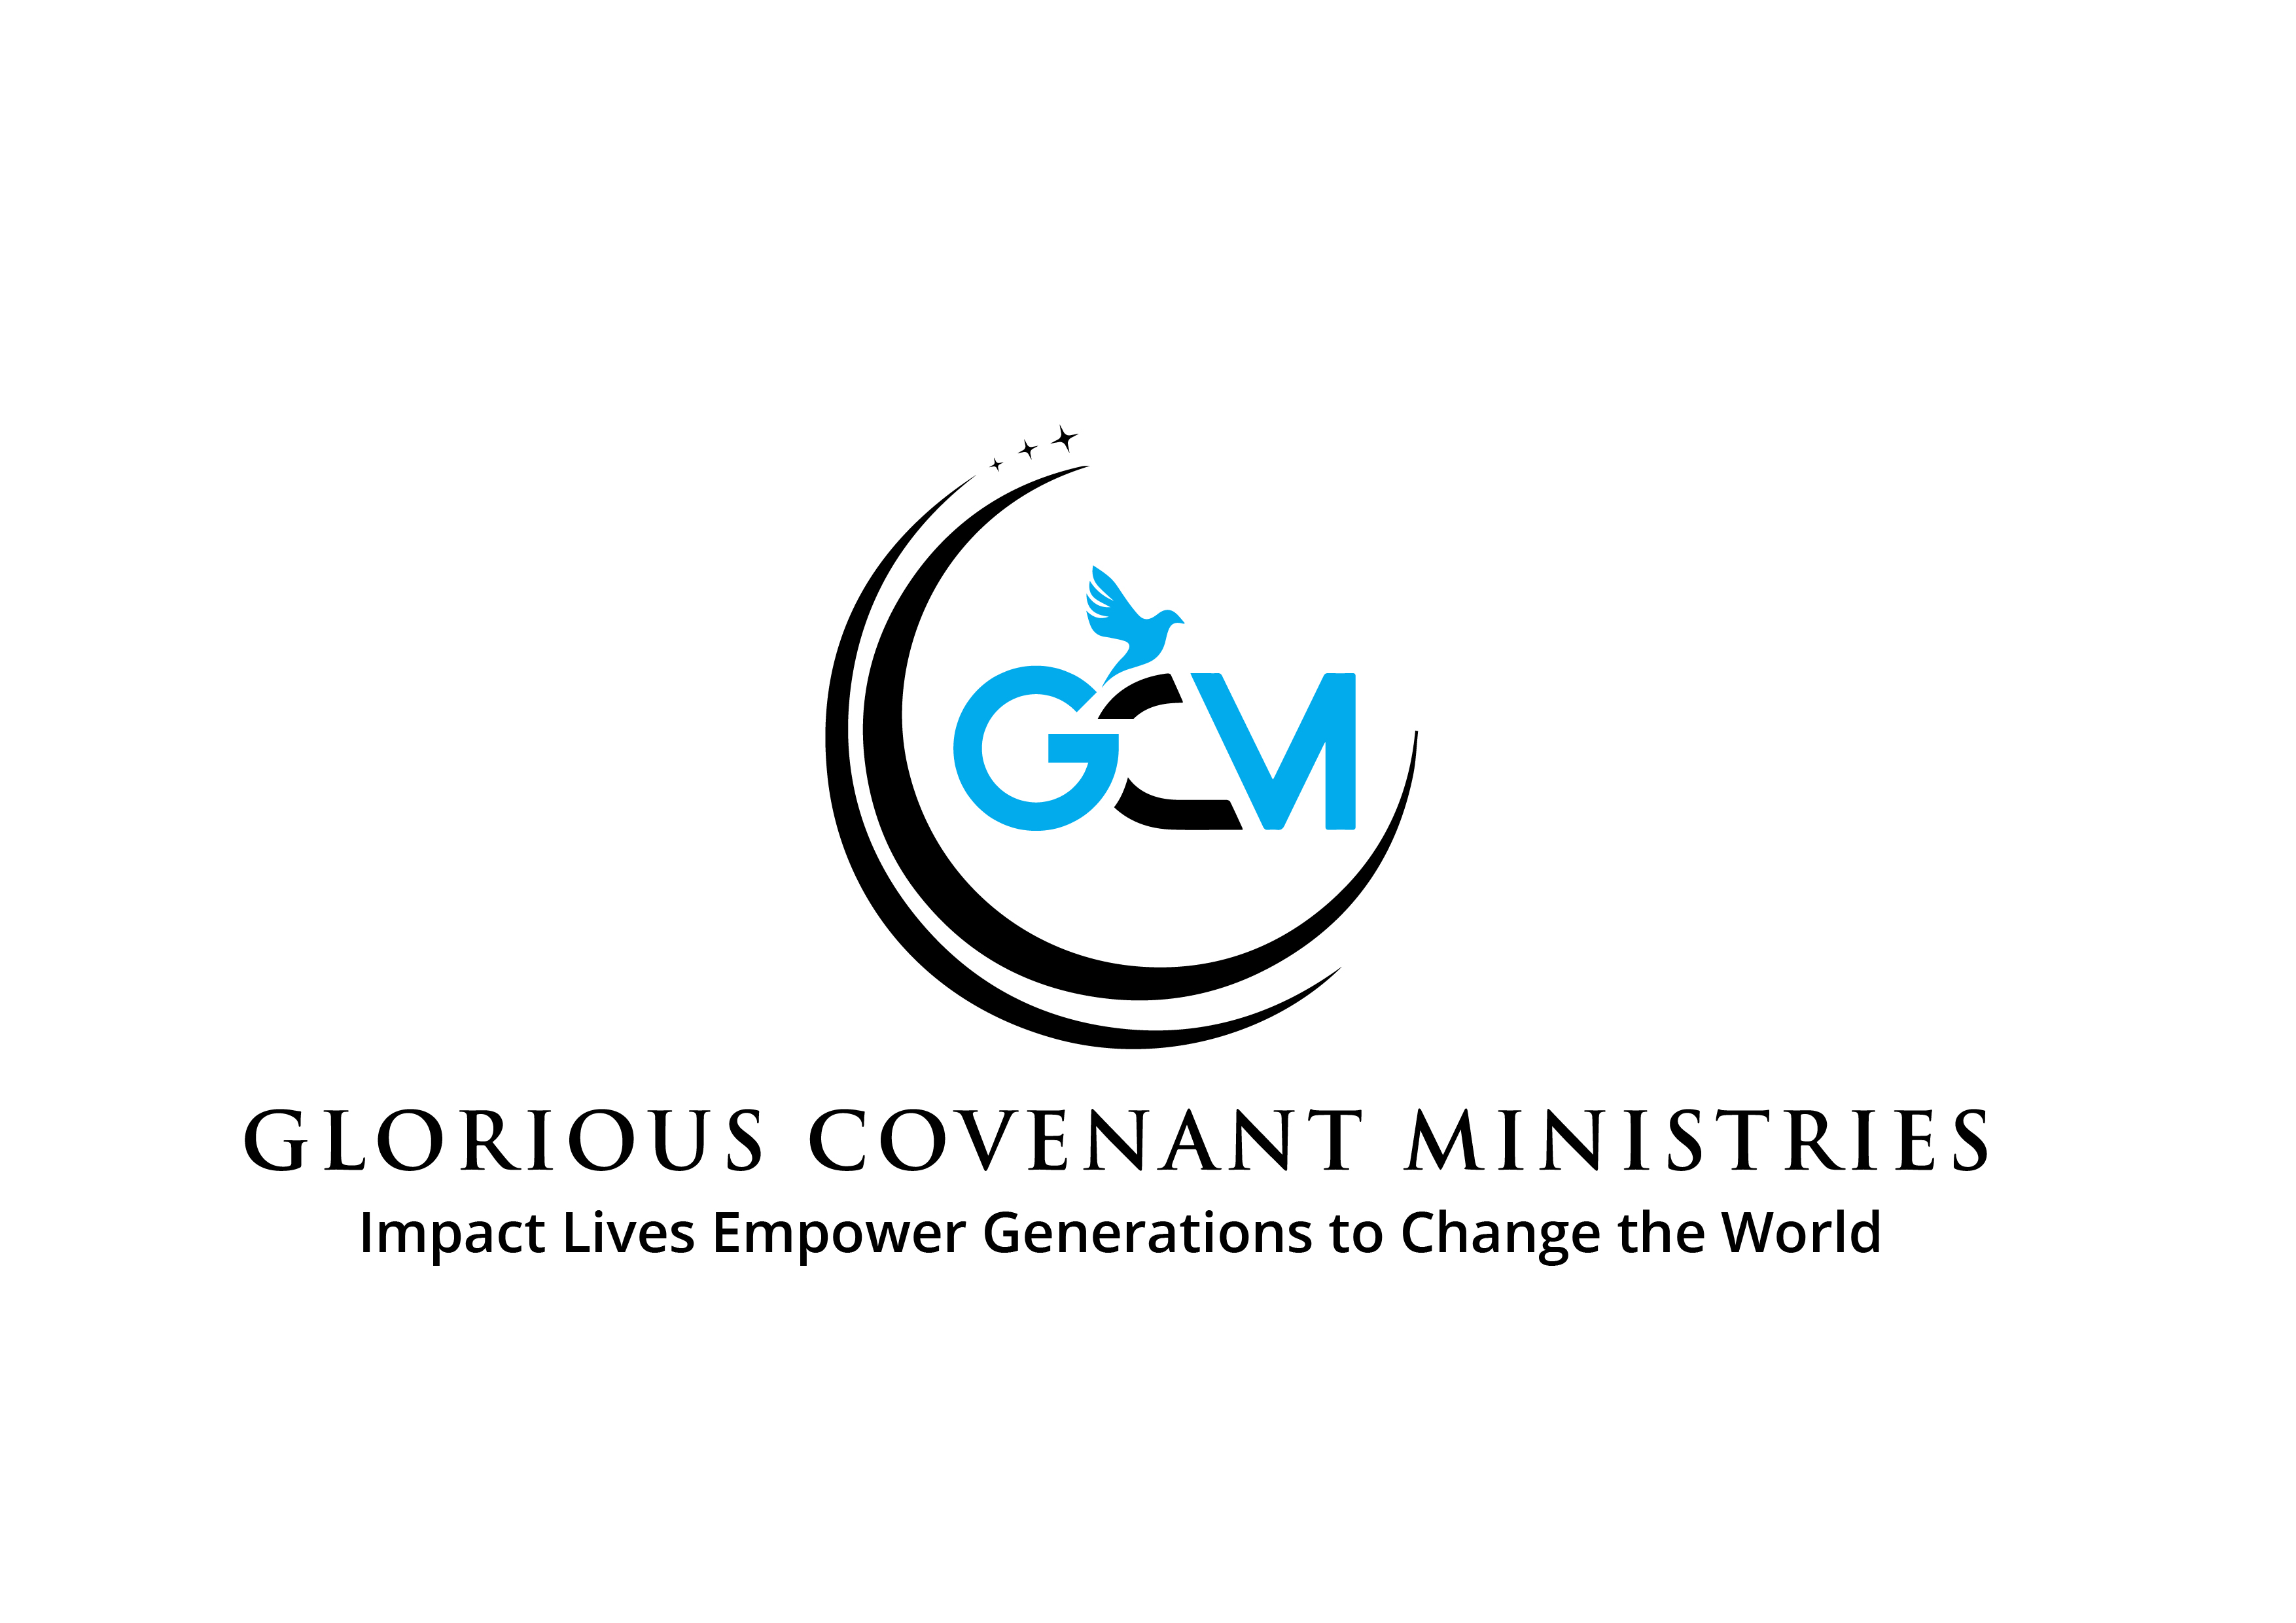 GLORIOUS COVENANT MINISTRIES